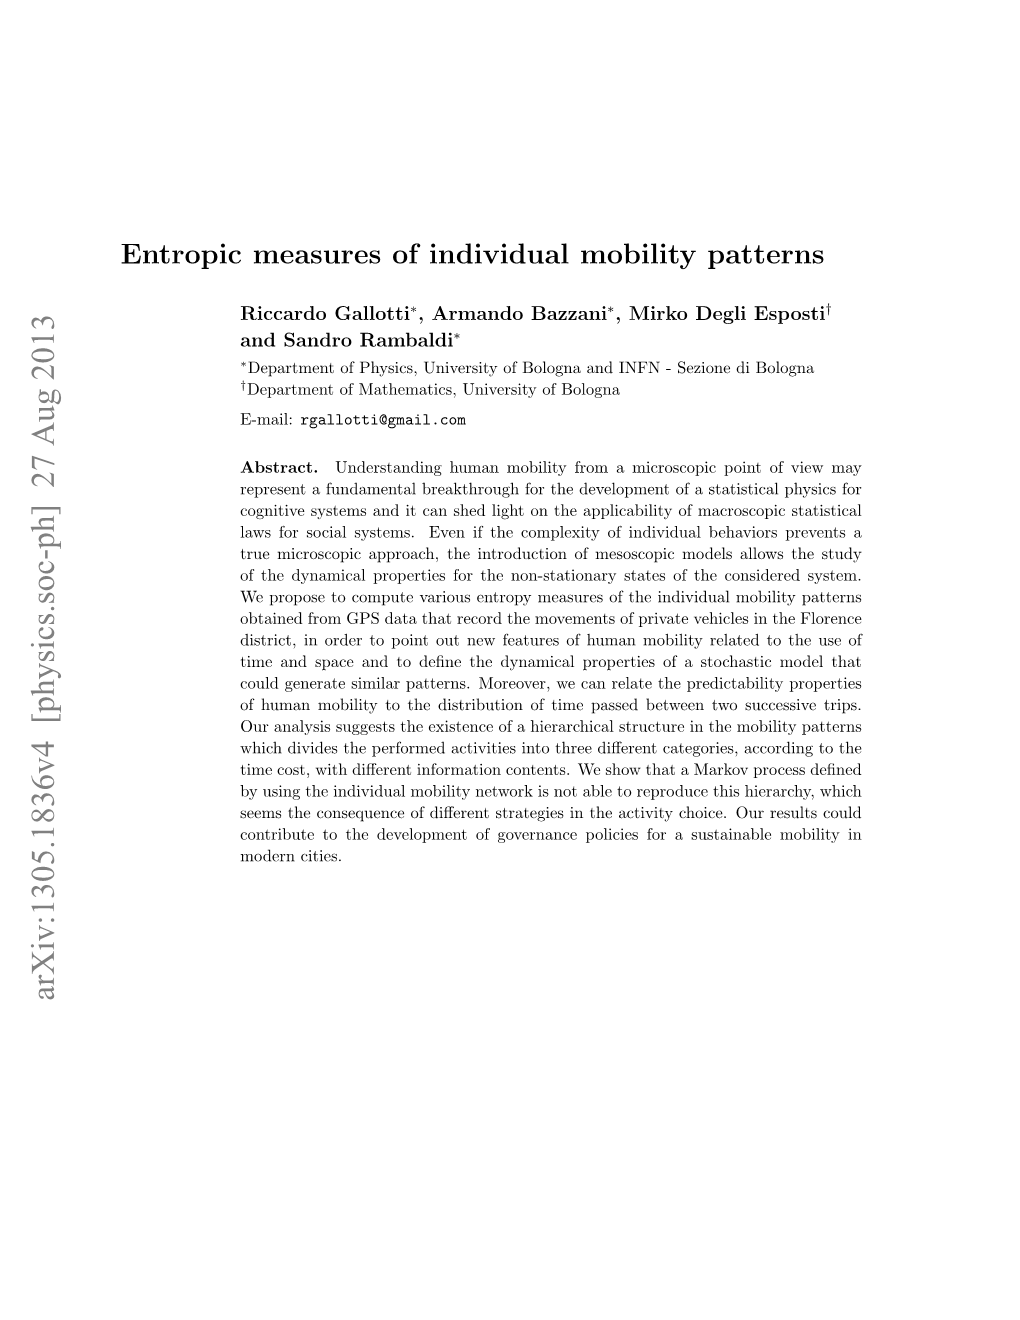 Entropic Measures of Individual Mobility Patterns